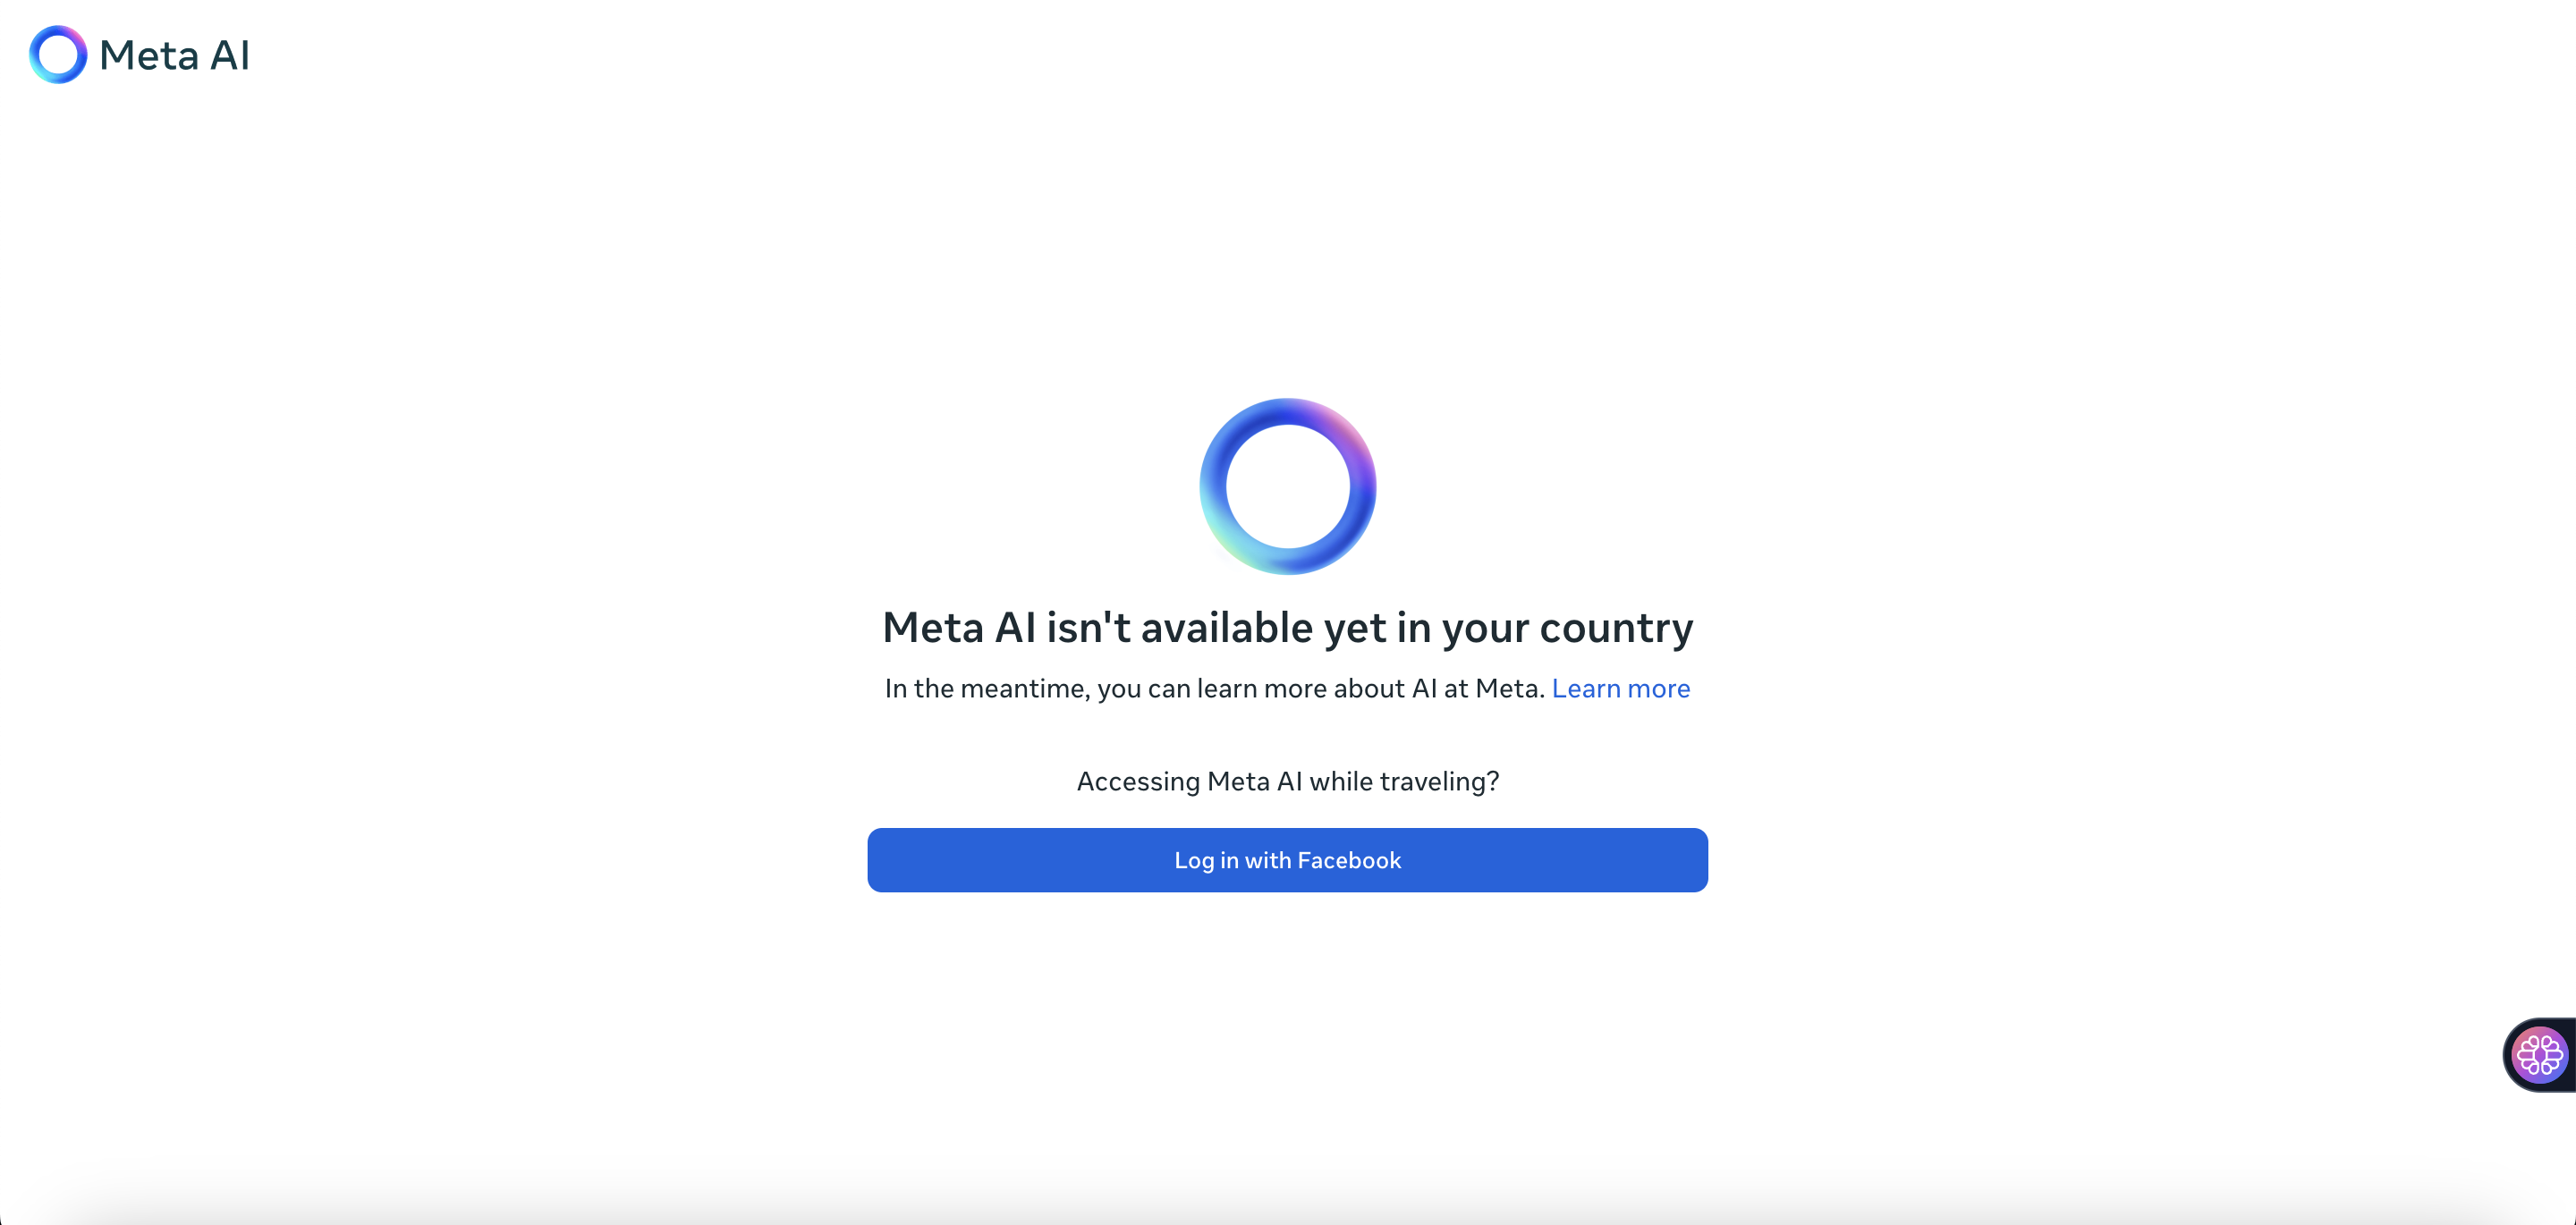 Meta AI isn't available yet in your country